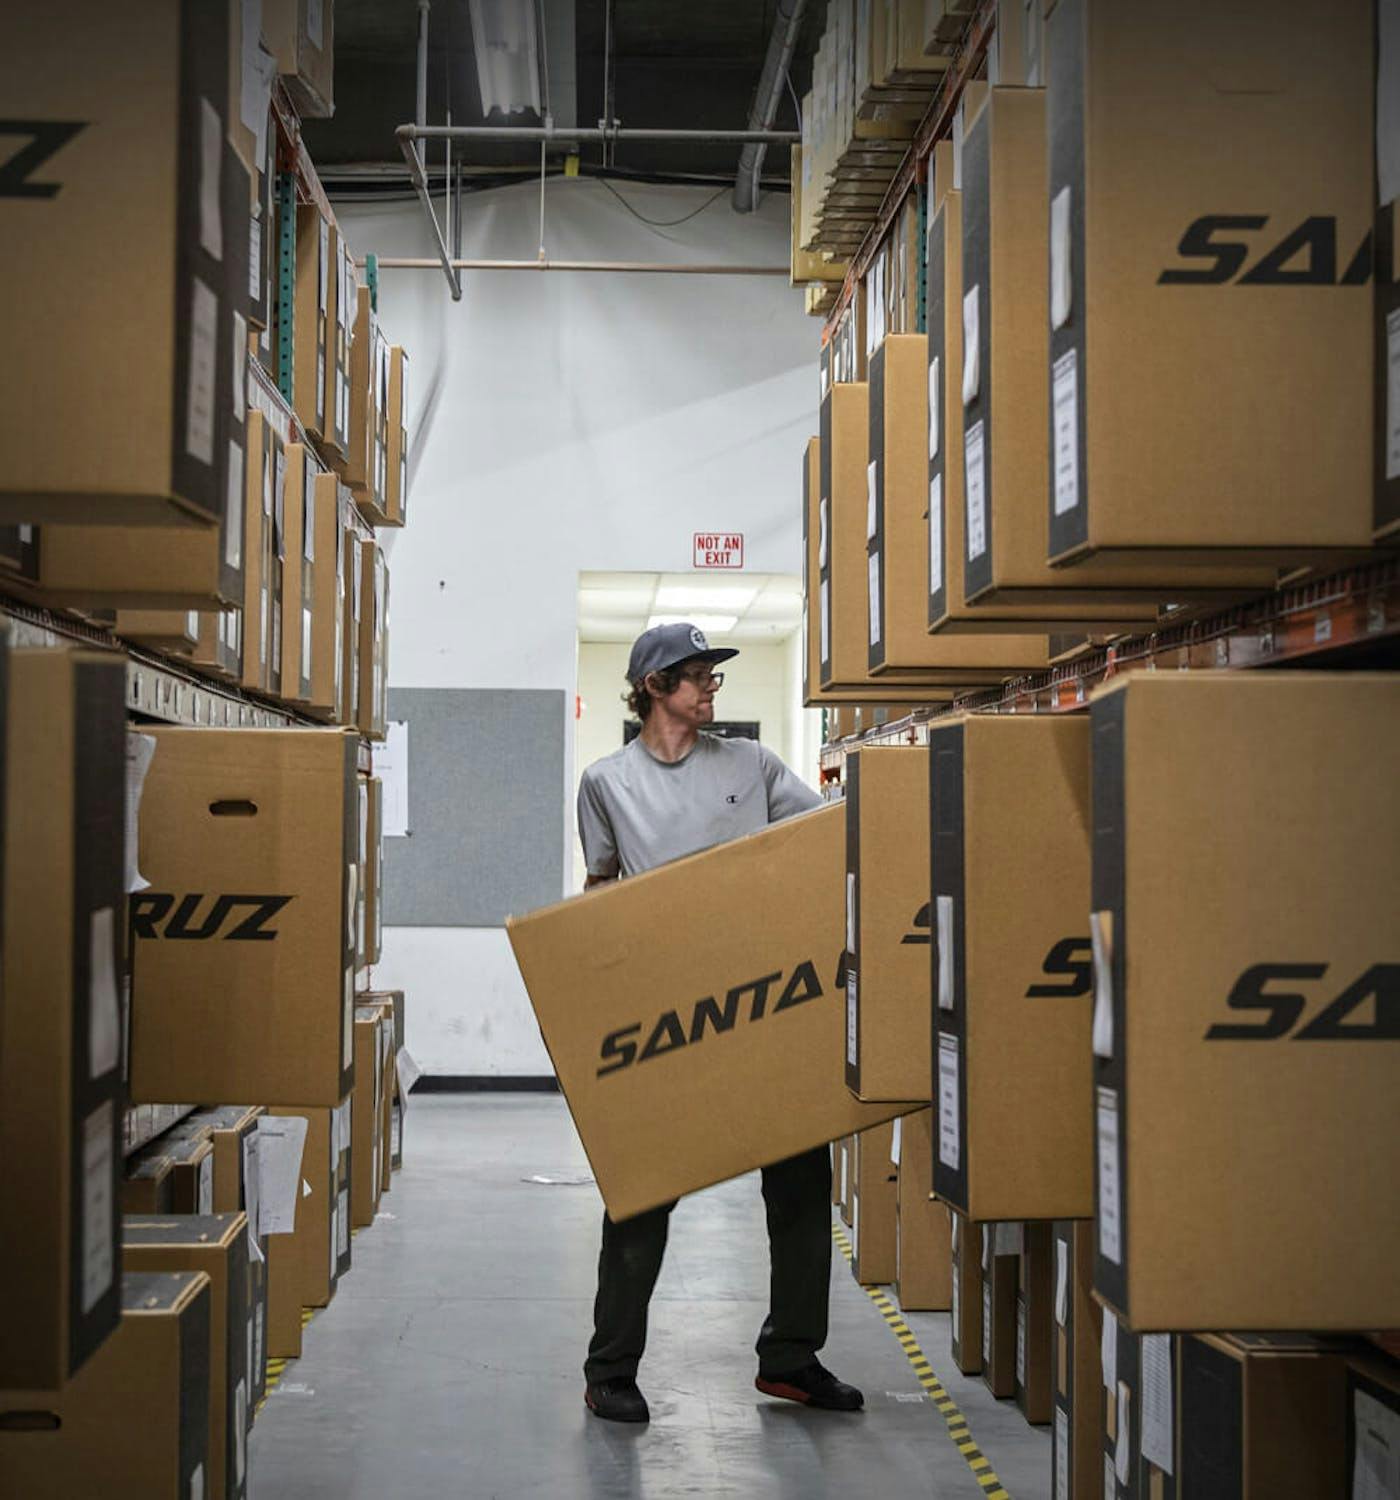 A factory worker pulling out a Santa Cruz Bike Box off of a shelf filled with other boxes